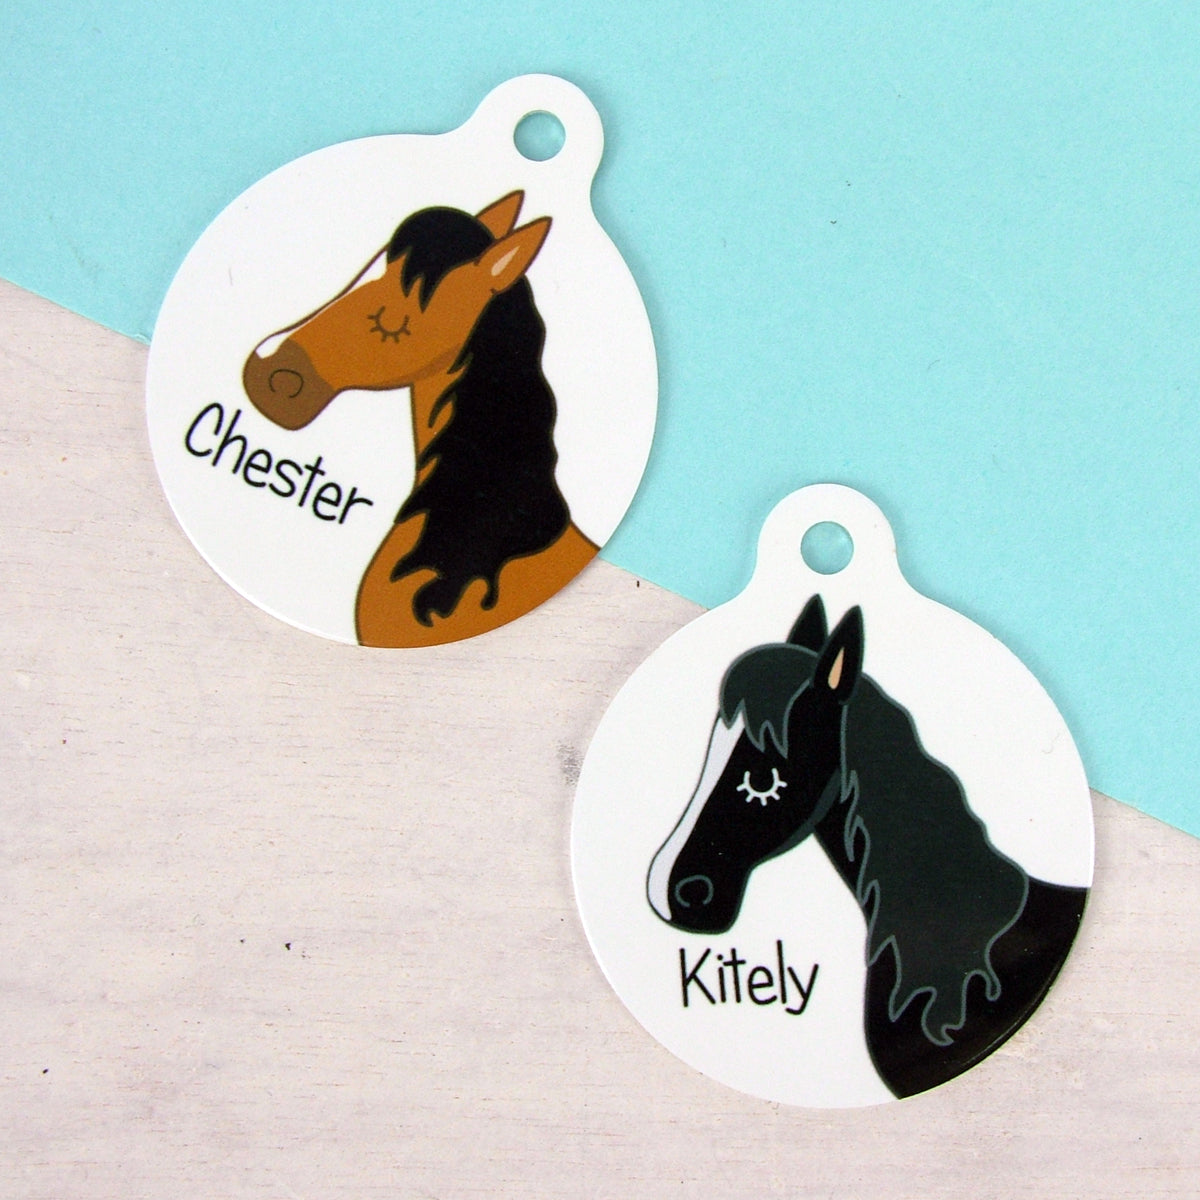   - Hoobynoo - Personalised Pet Tags and Gifts